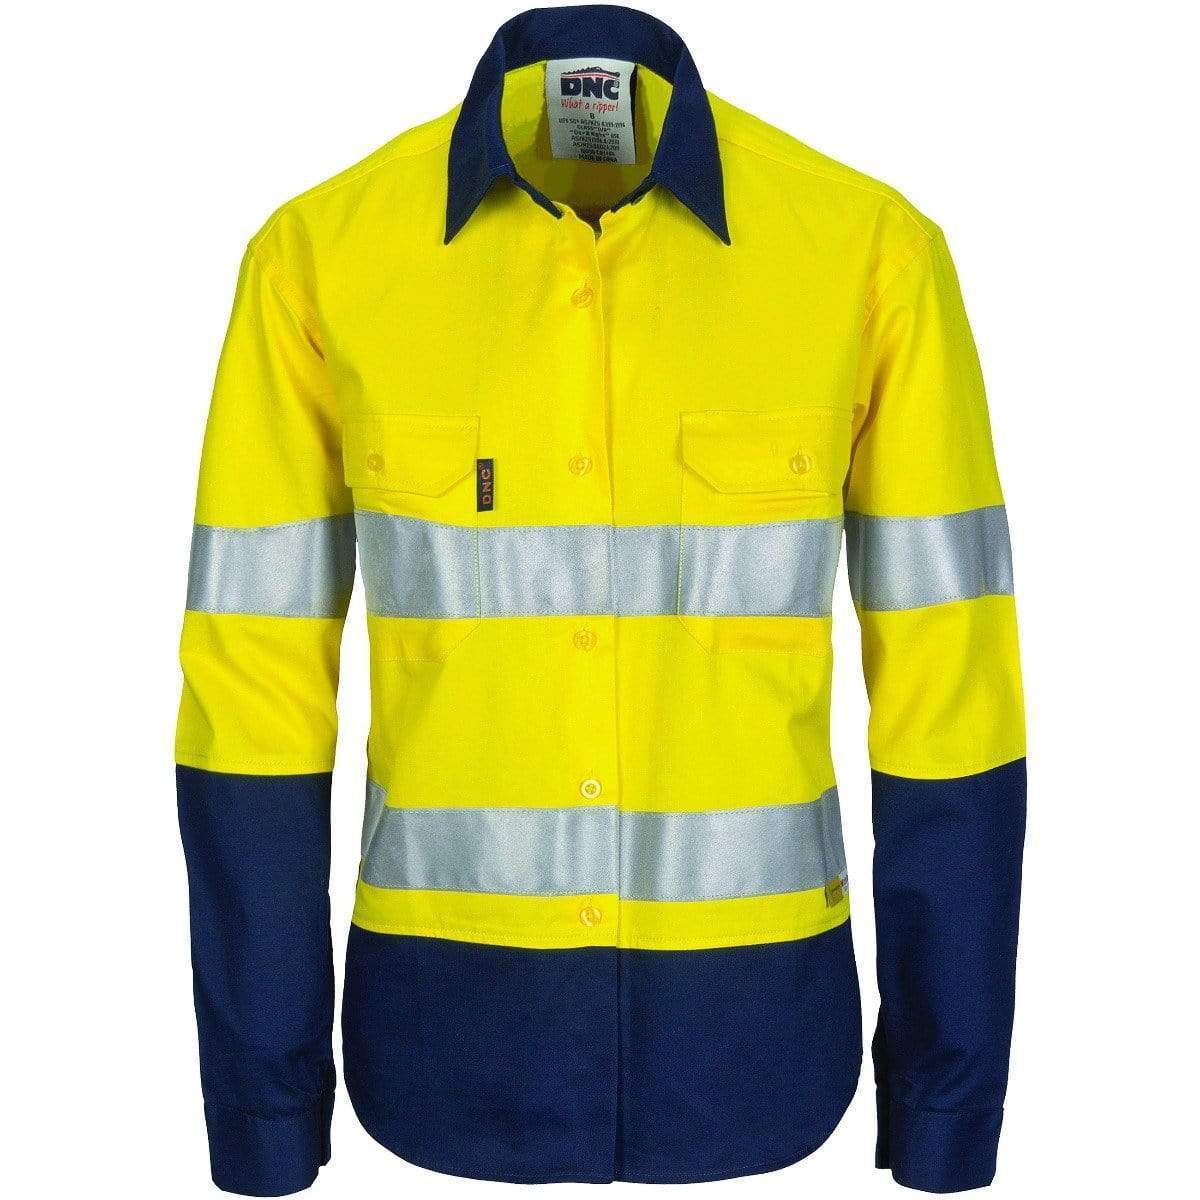 Dnc Workwear Women’s Hi-vis Two-tone Cool-breeze Long Sleeve Cotton Shirt With 3m Reflective Tape - 3986 Work Wear DNC Workwear Yellow/Navy 6 